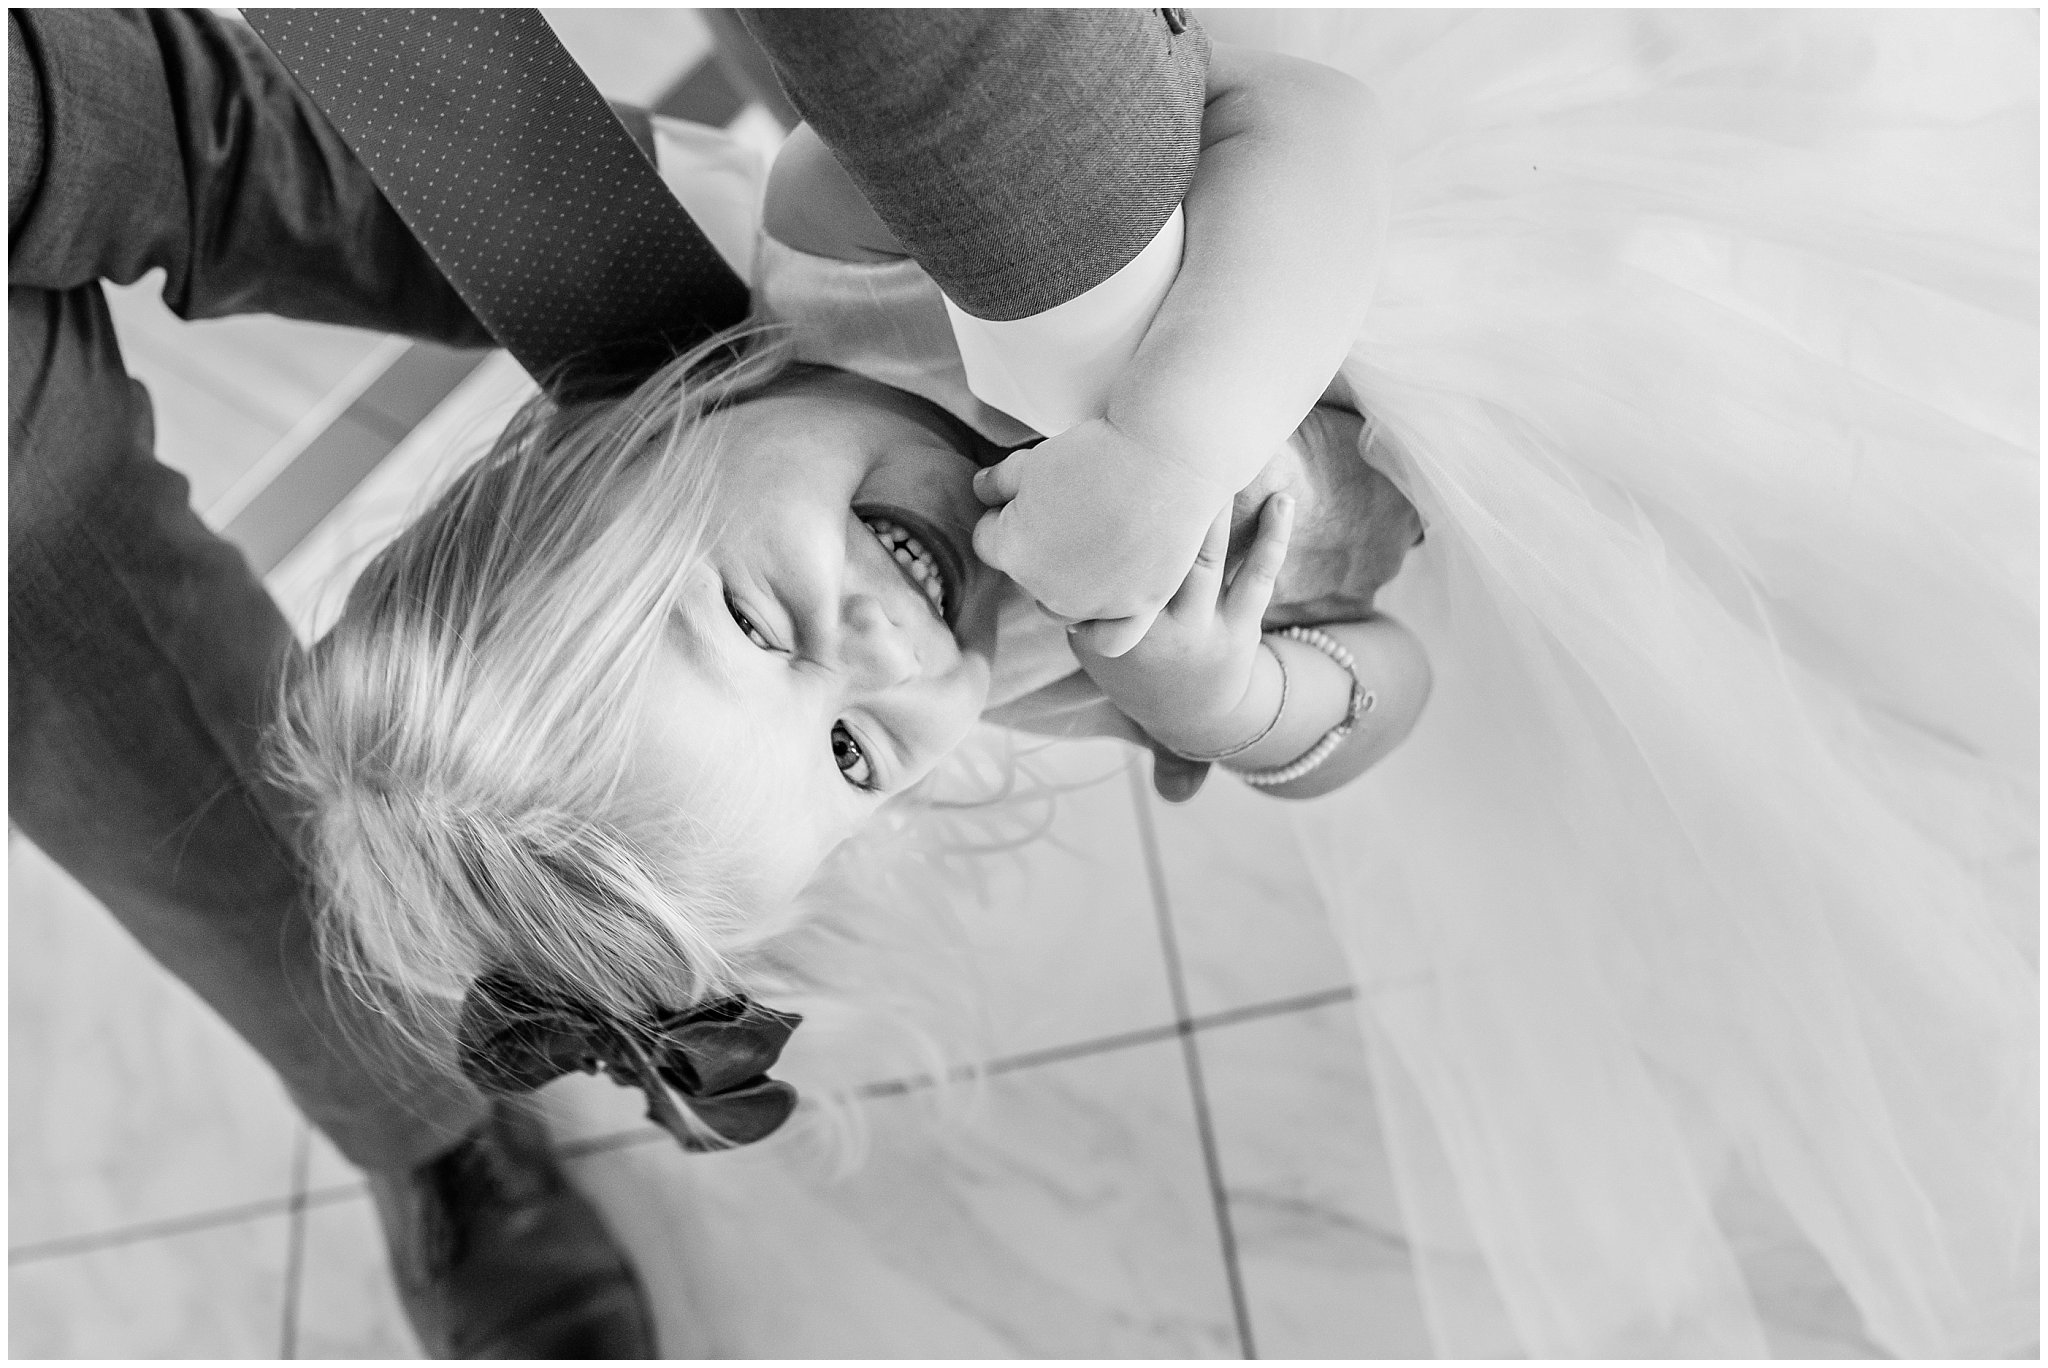 Open dance floor party | Oquirrh Mountain Temple and Millennial Falls Wedding | Jessie and Dallin Photography